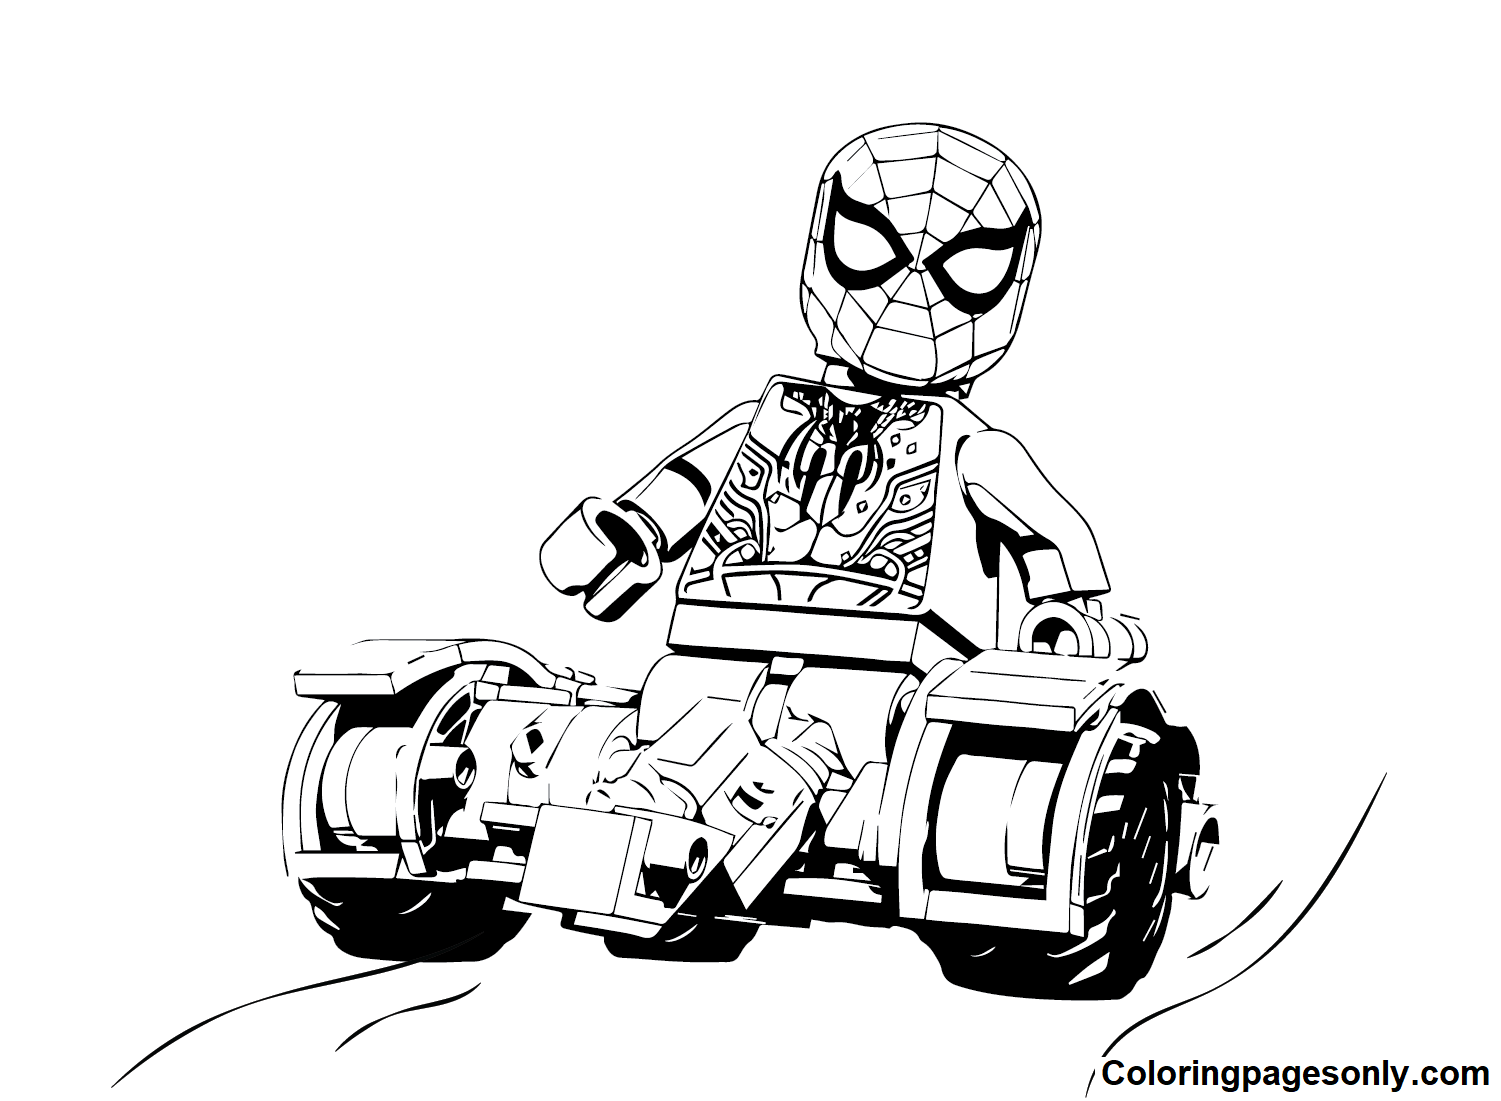 Lego Spiderman Movie Coloring Pages